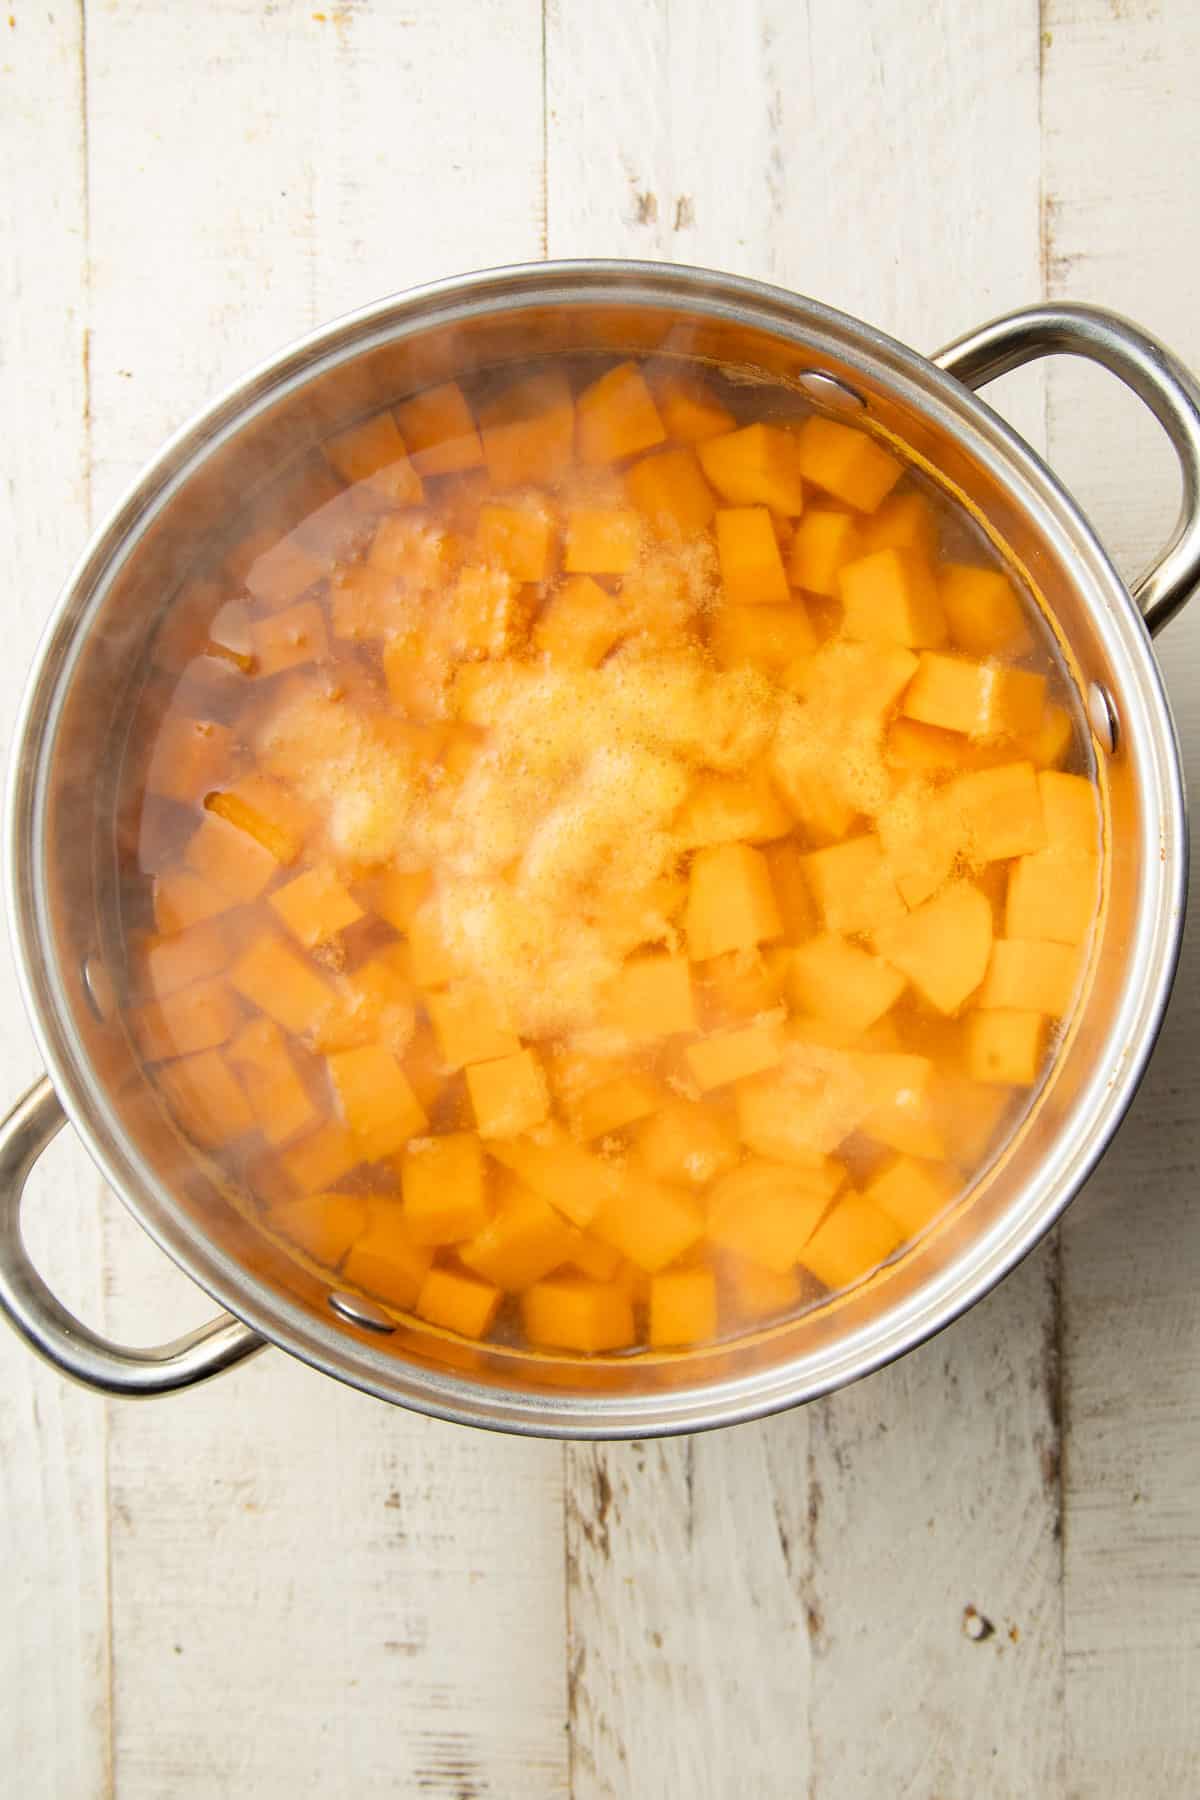 Just boiled sweet potato cubes in a pot of water.